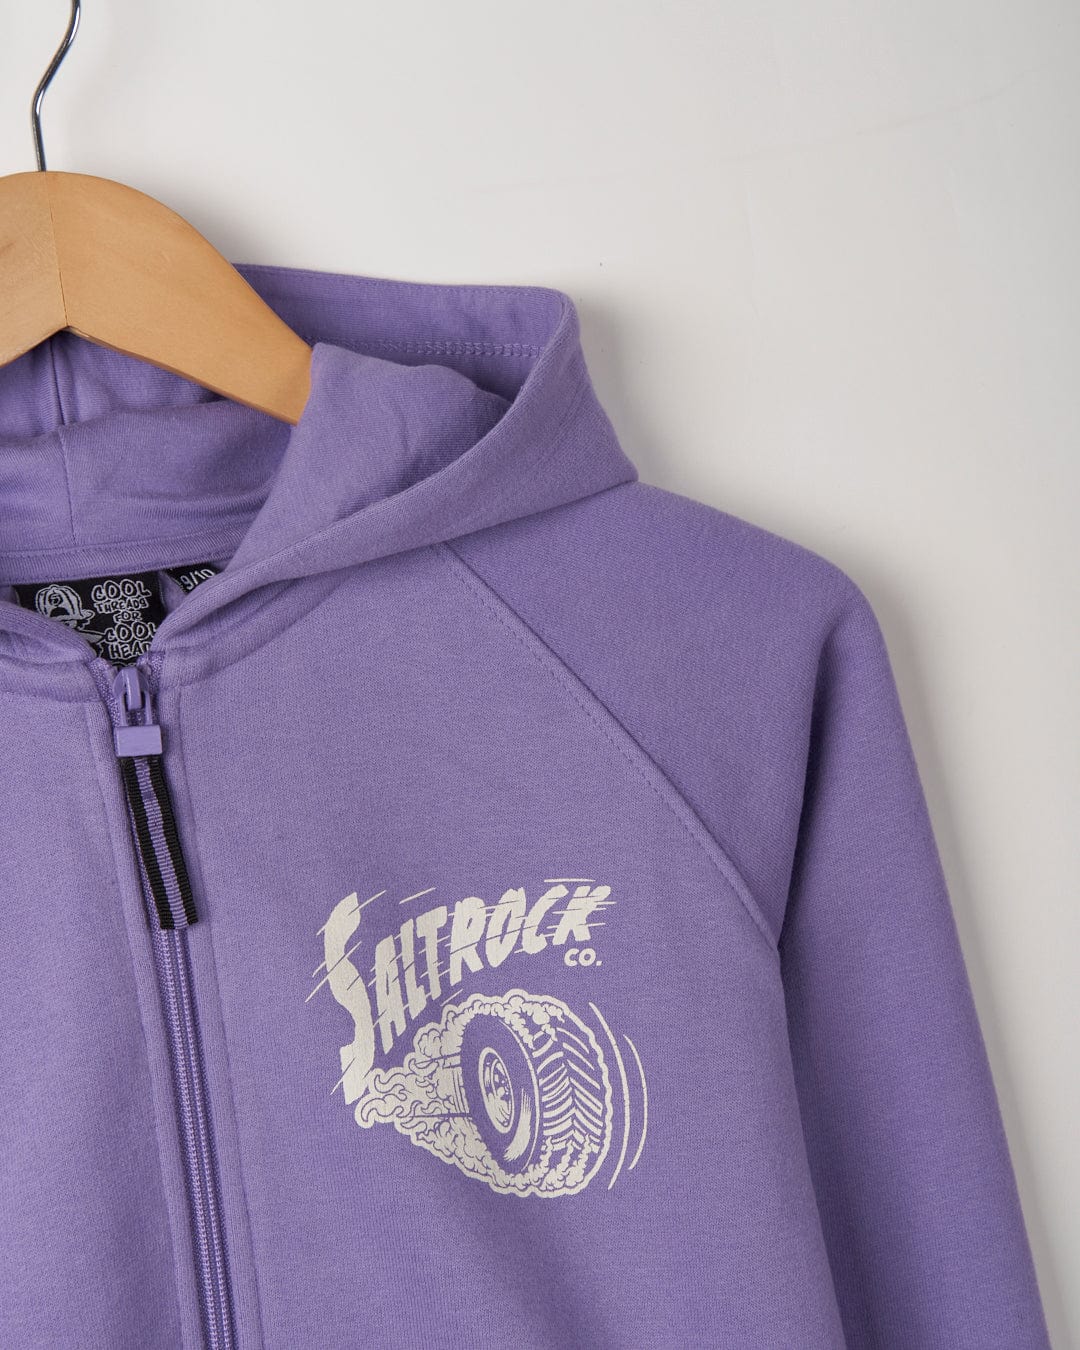 Purple No Road No Problem - Recycled Kids Zip Hoodie with Saltrock branded graphics, hanging on a wooden hanger against a plain background.